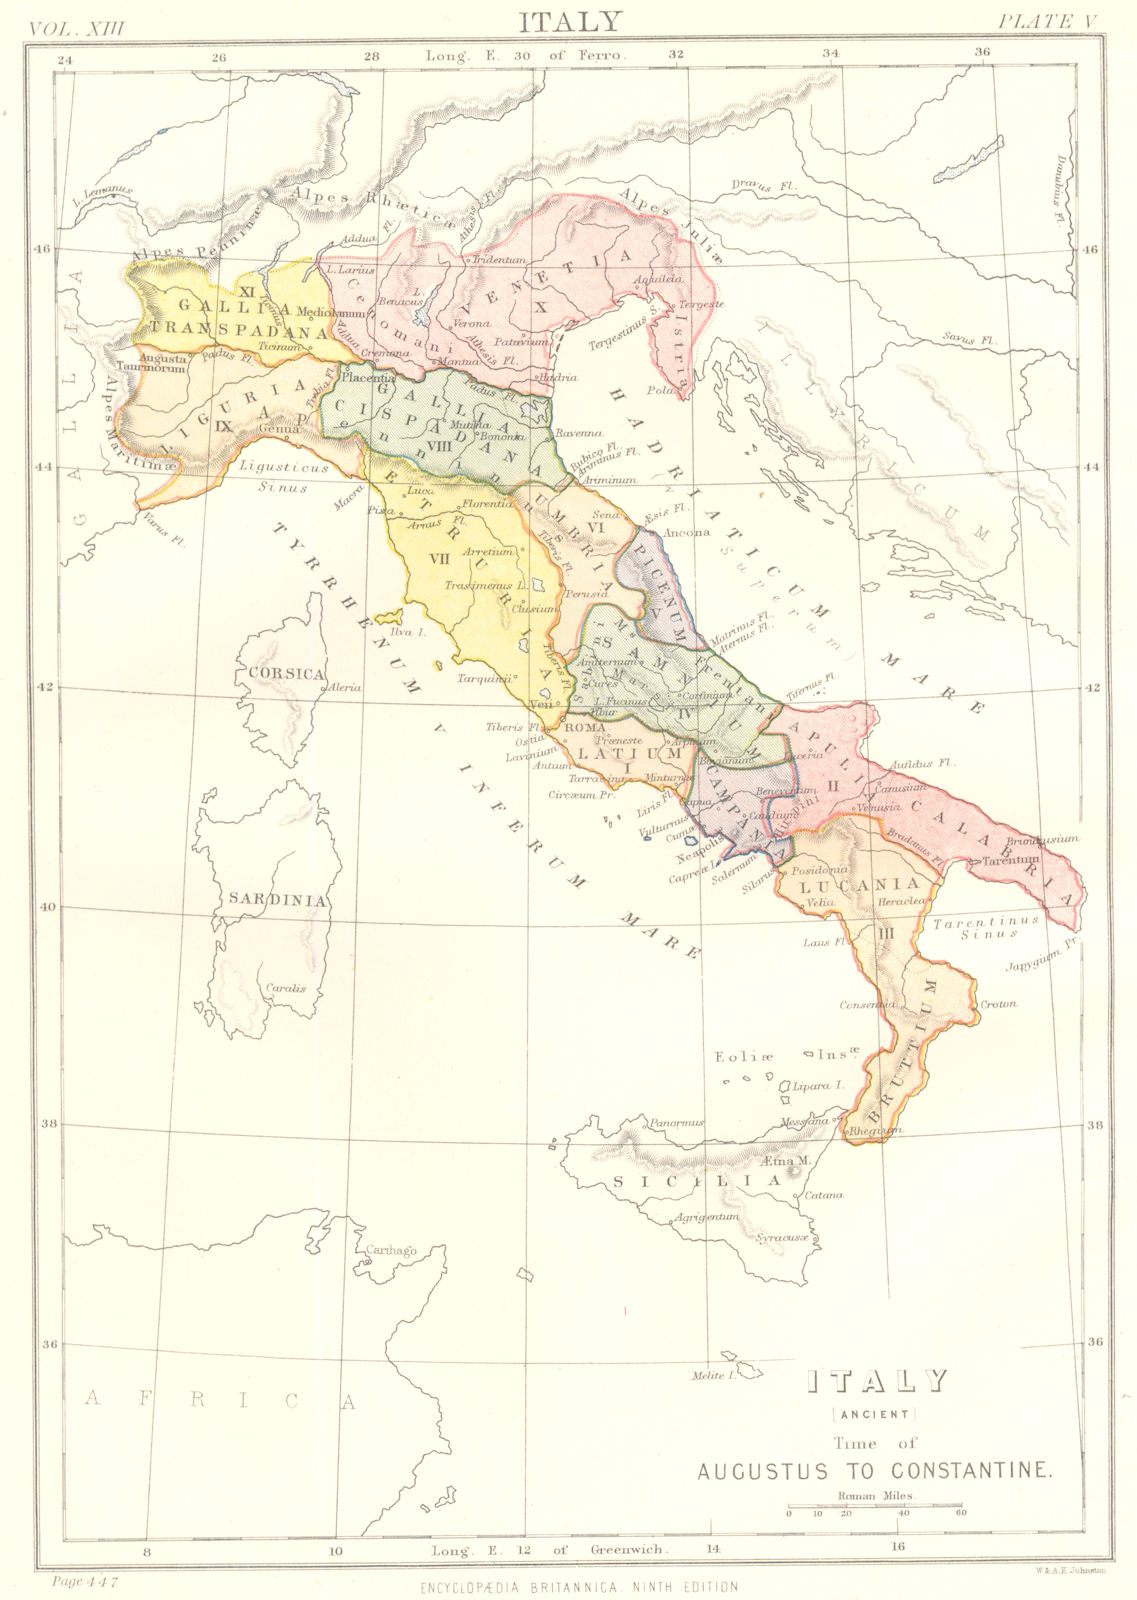 Associate Product ITALY ANCIENT.time of Augustus to Constantine. Britannica 9th edition 1898 map